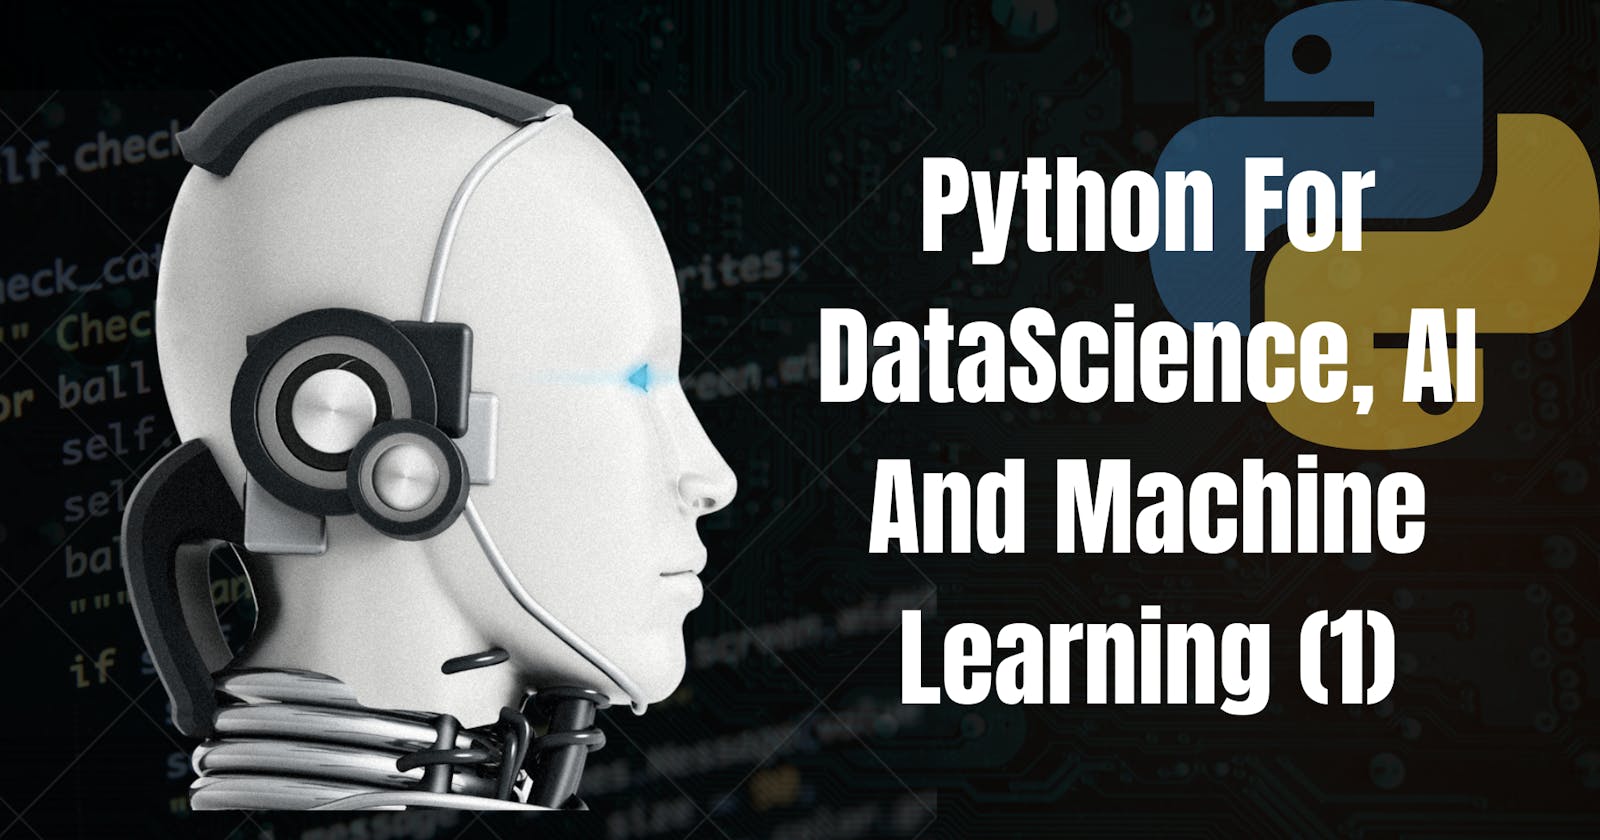 Python For DAM (DataScience, AI and Machine learning) Series